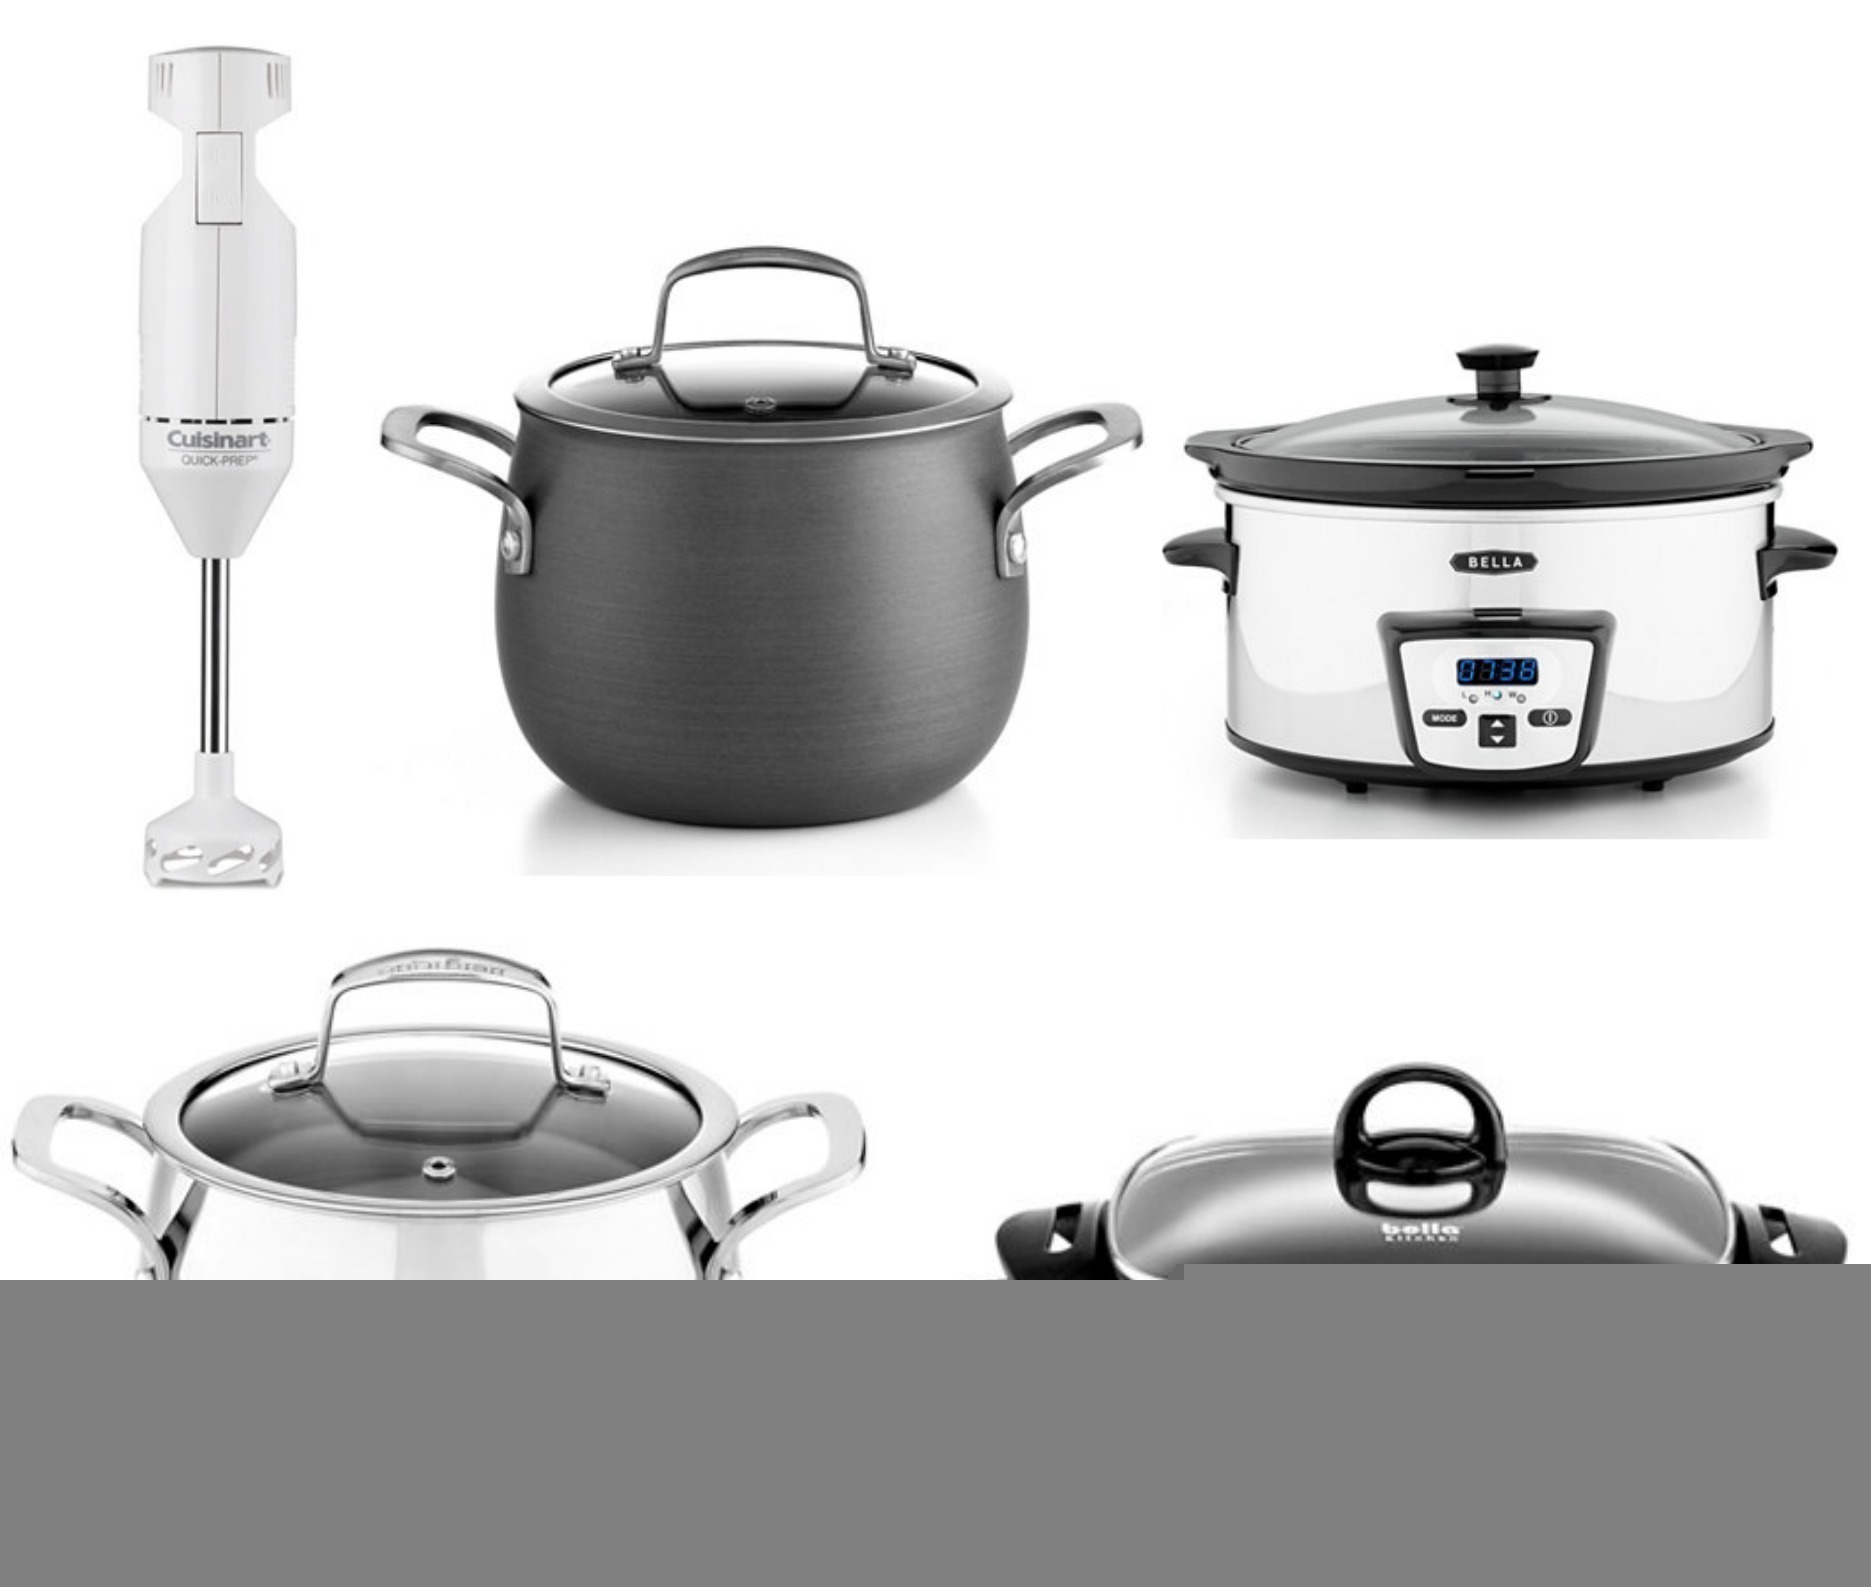 Macys Small Kitchen Appliances 999 After Rebate The